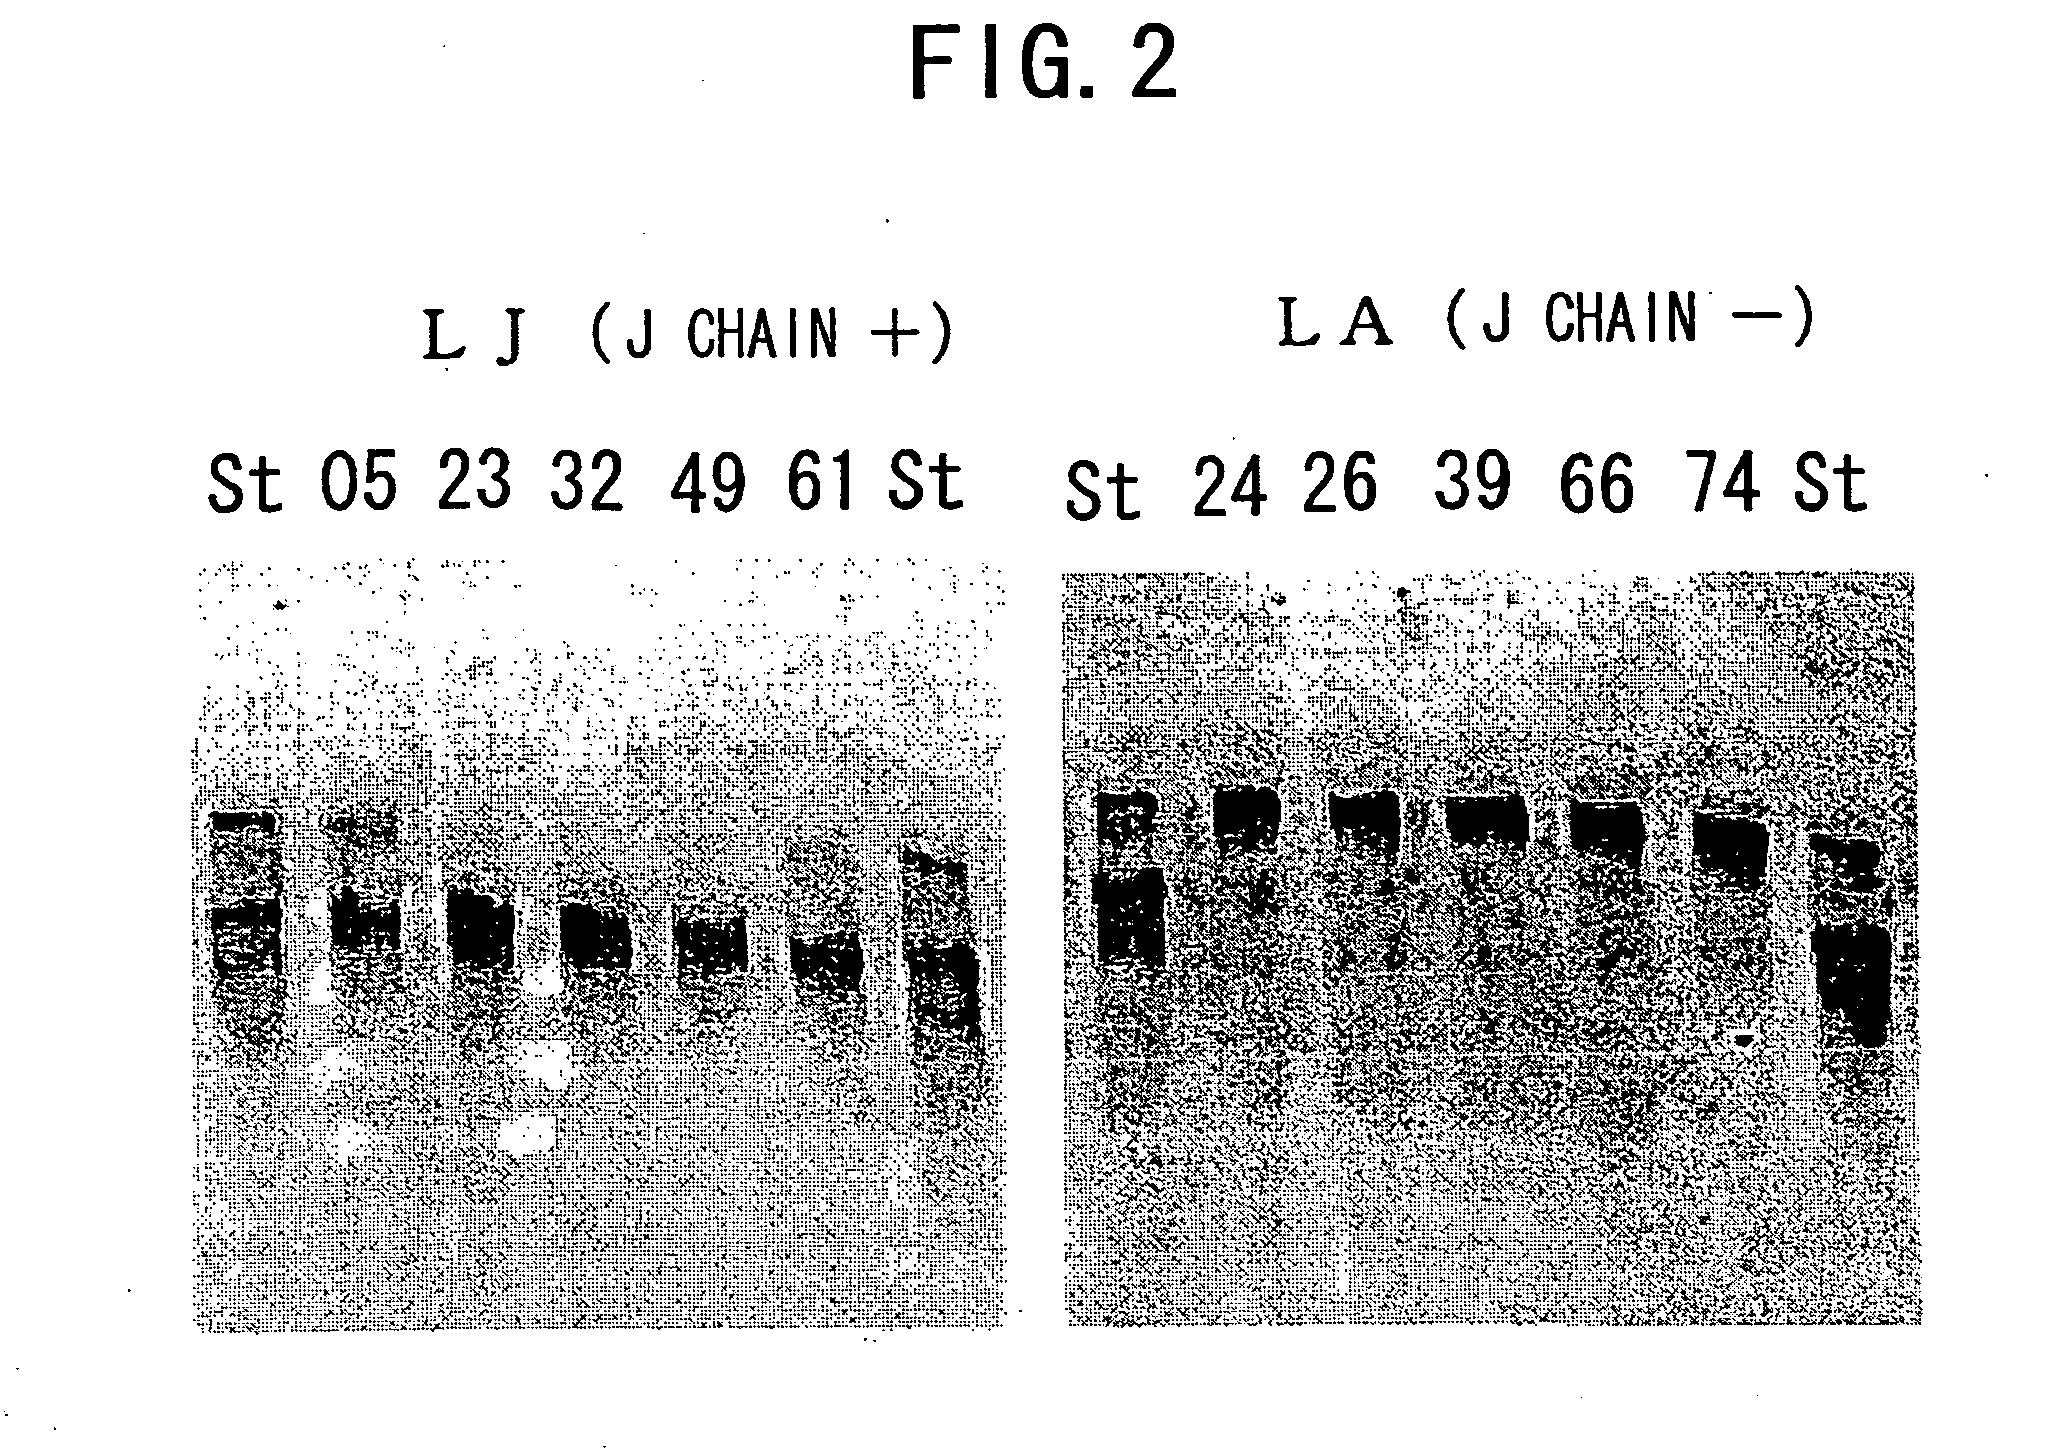 IGM production by transformed cells and methods of quantifying said IgM production